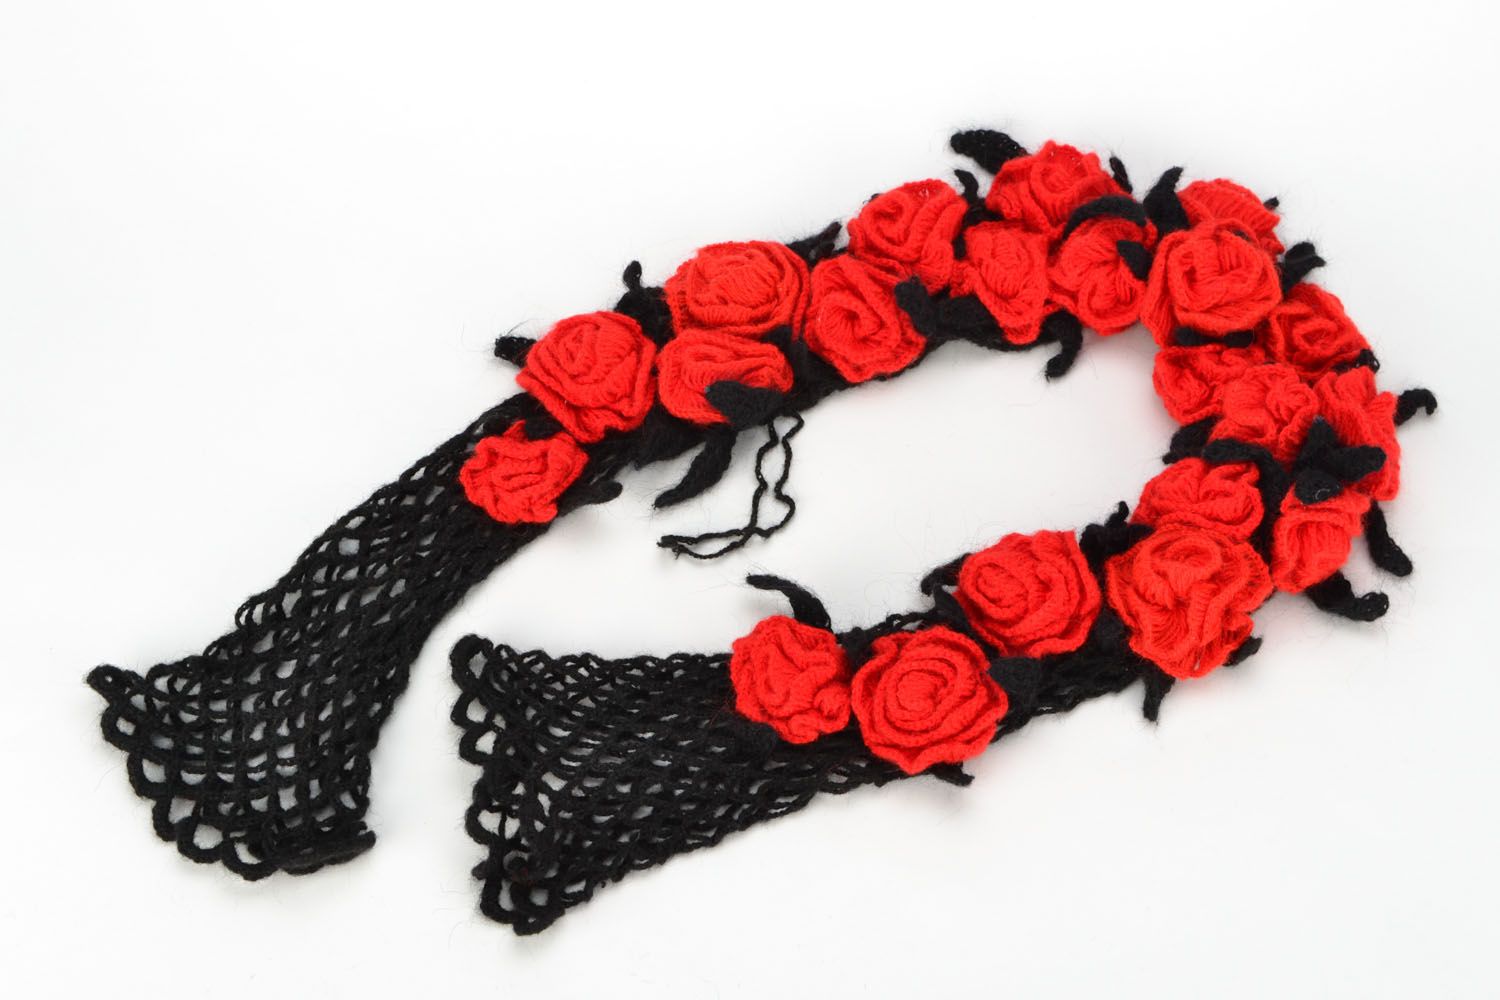 Crochet scarf with flowers photo 1